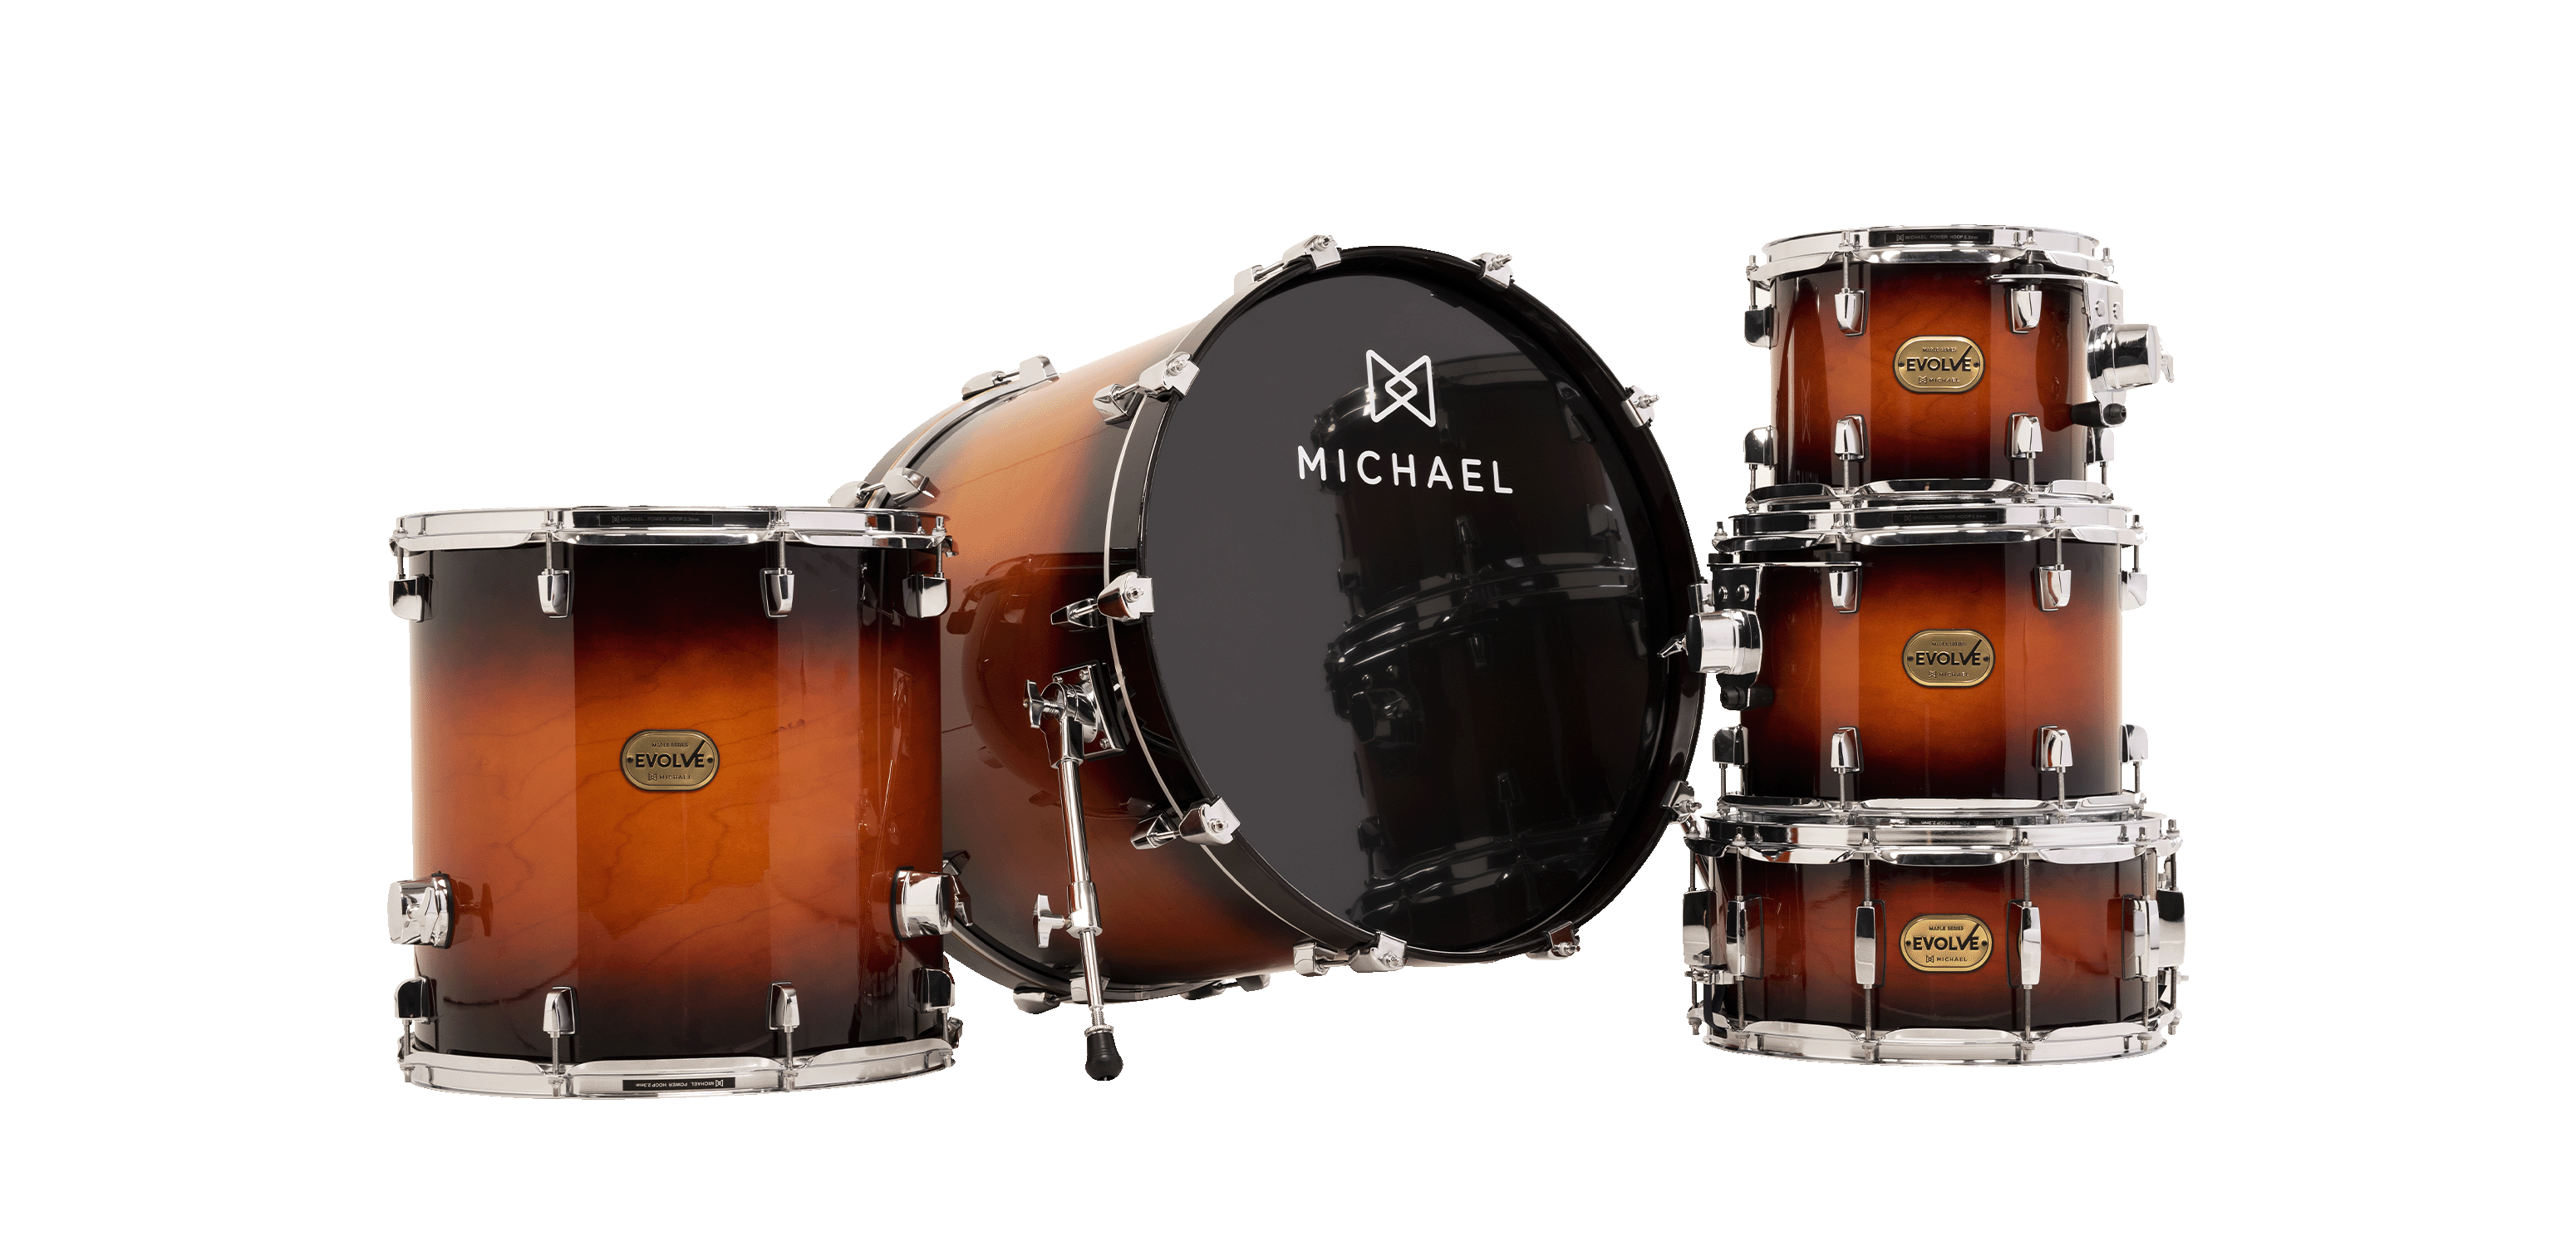 BATERIA MICHAEL EVOLVE DME622 BUMBO 22" (SHELL PACK)